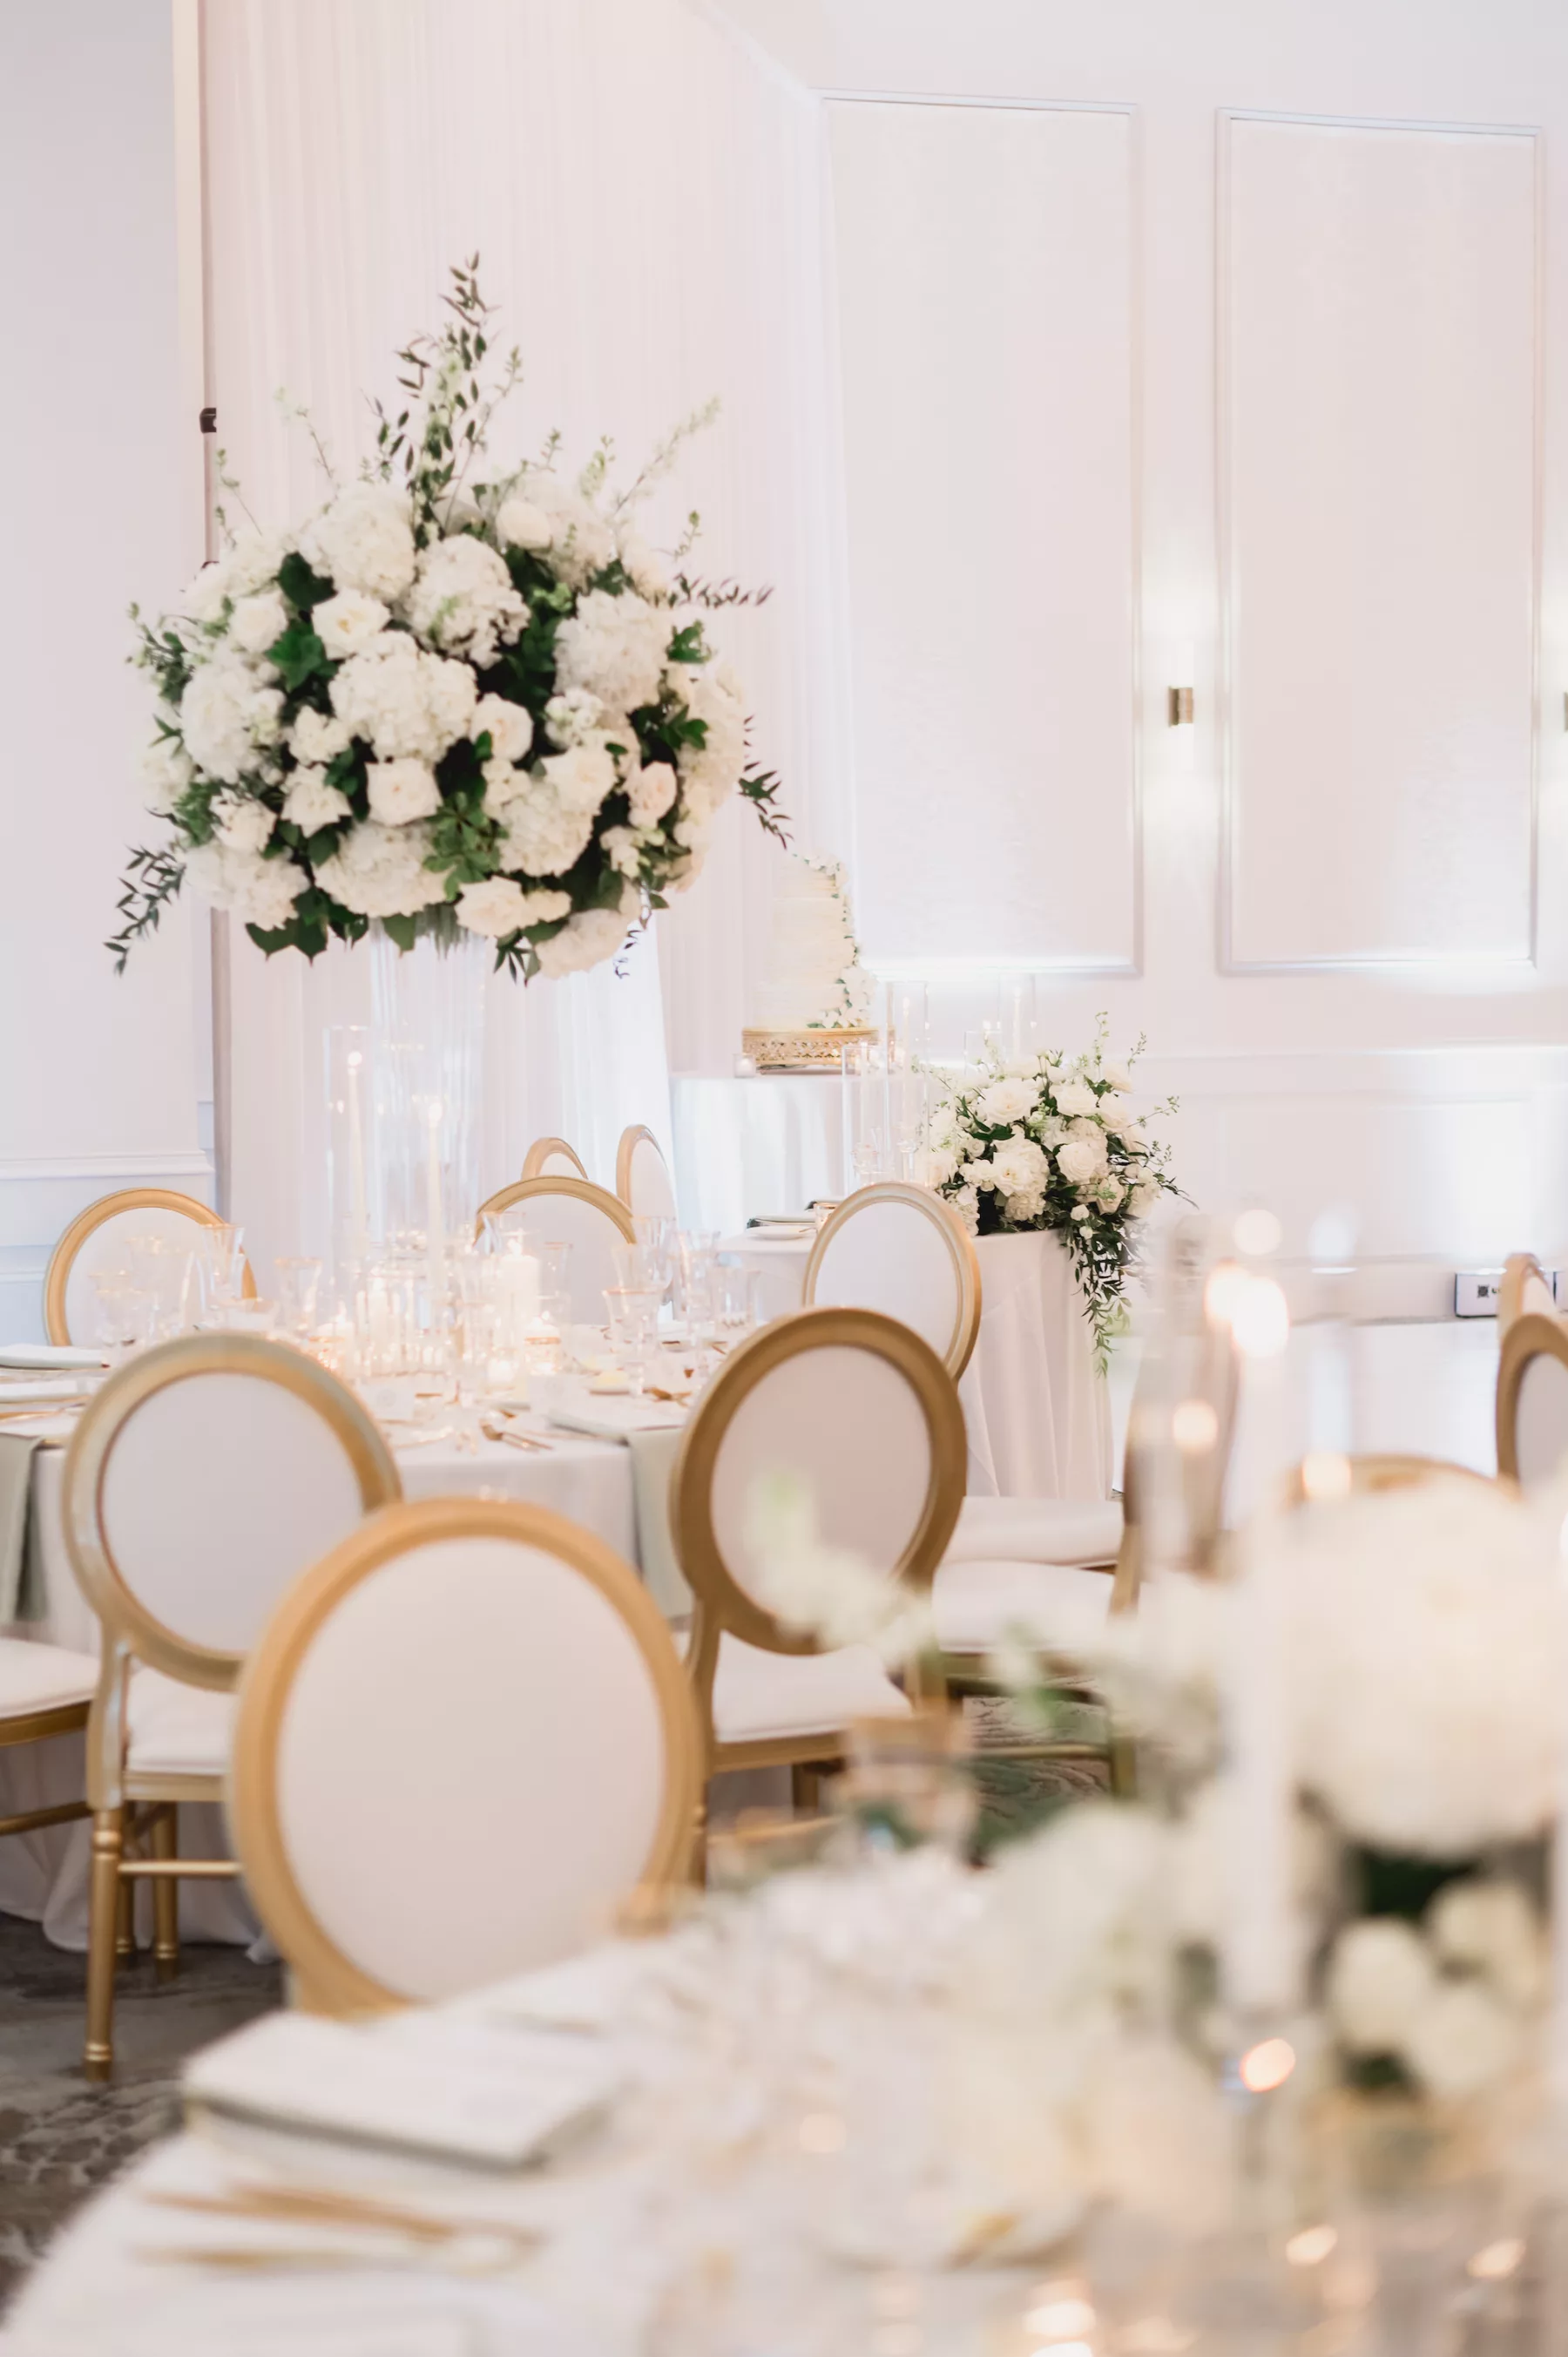 Elegant White and Gold Ballroom Spring Wedding Reception Decor Ideas | White Hydrangeas, Roses, and Greenery with Tall Glass Vase Centerpiece Inspiration | Tampa Bay Florist Bruce Wayne Florals | Clearwater Beach Kate Ryan Event Rentals